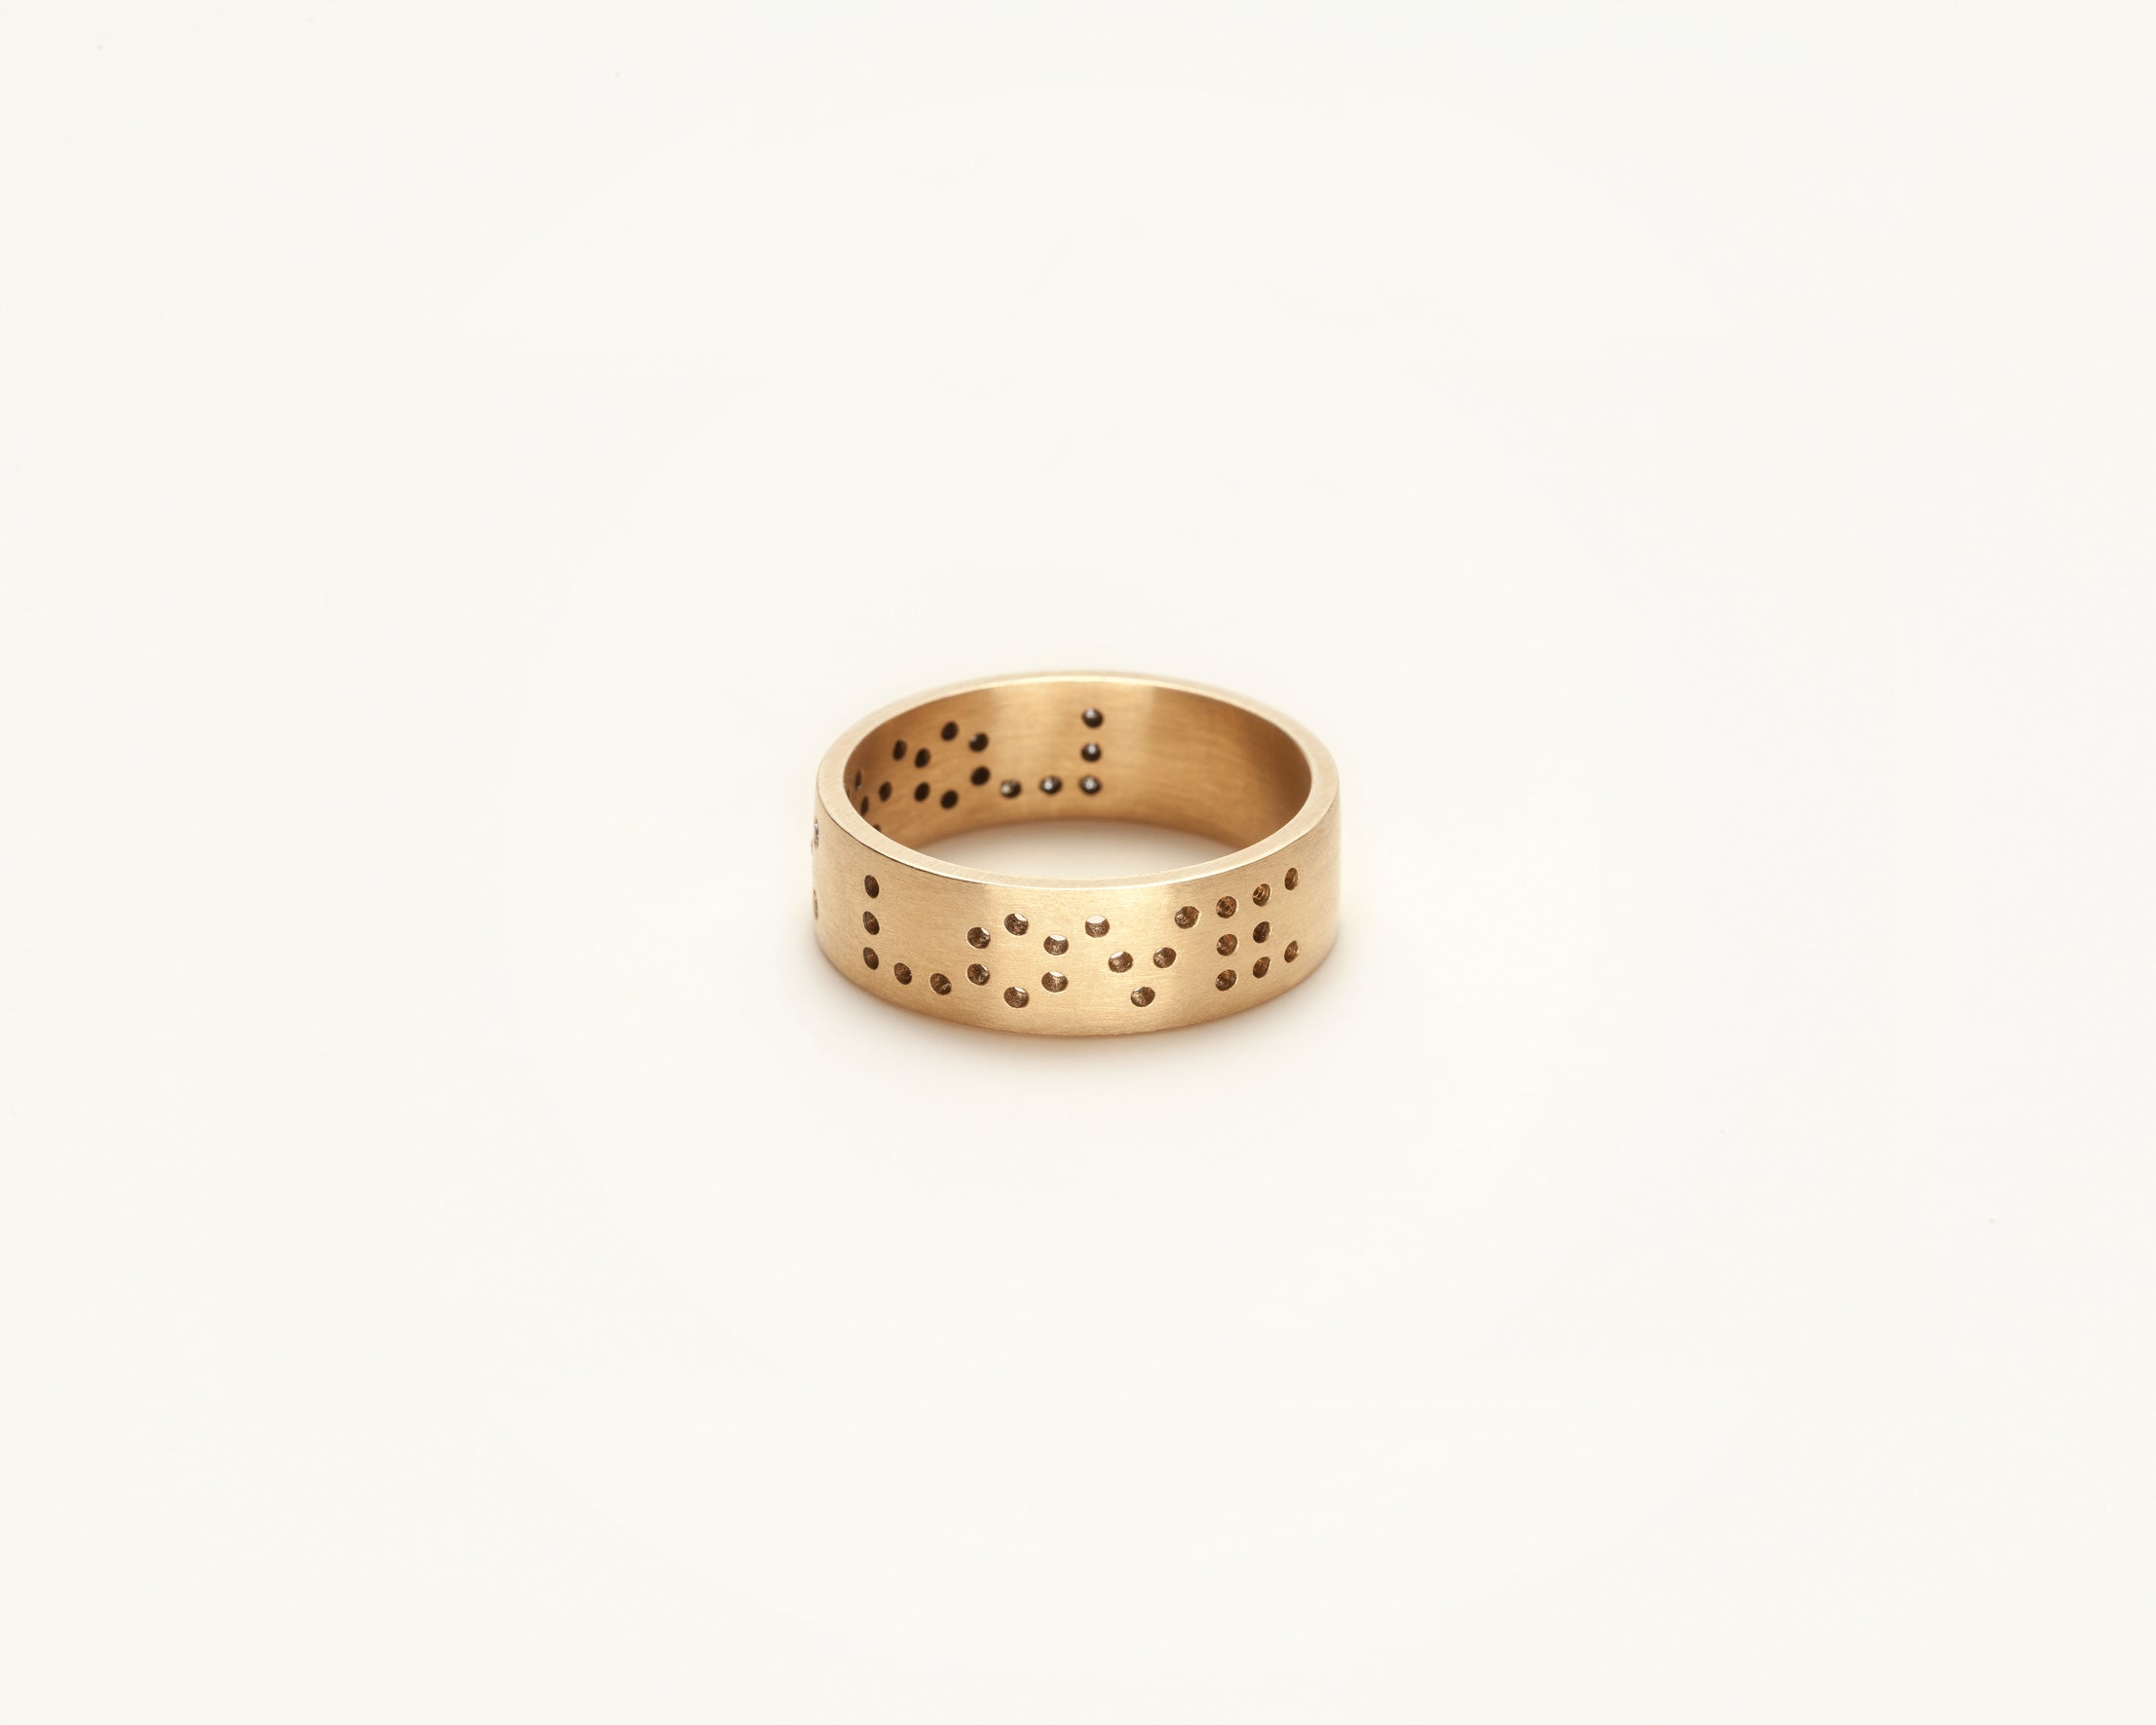 18KT Yellow gold band ring - Love